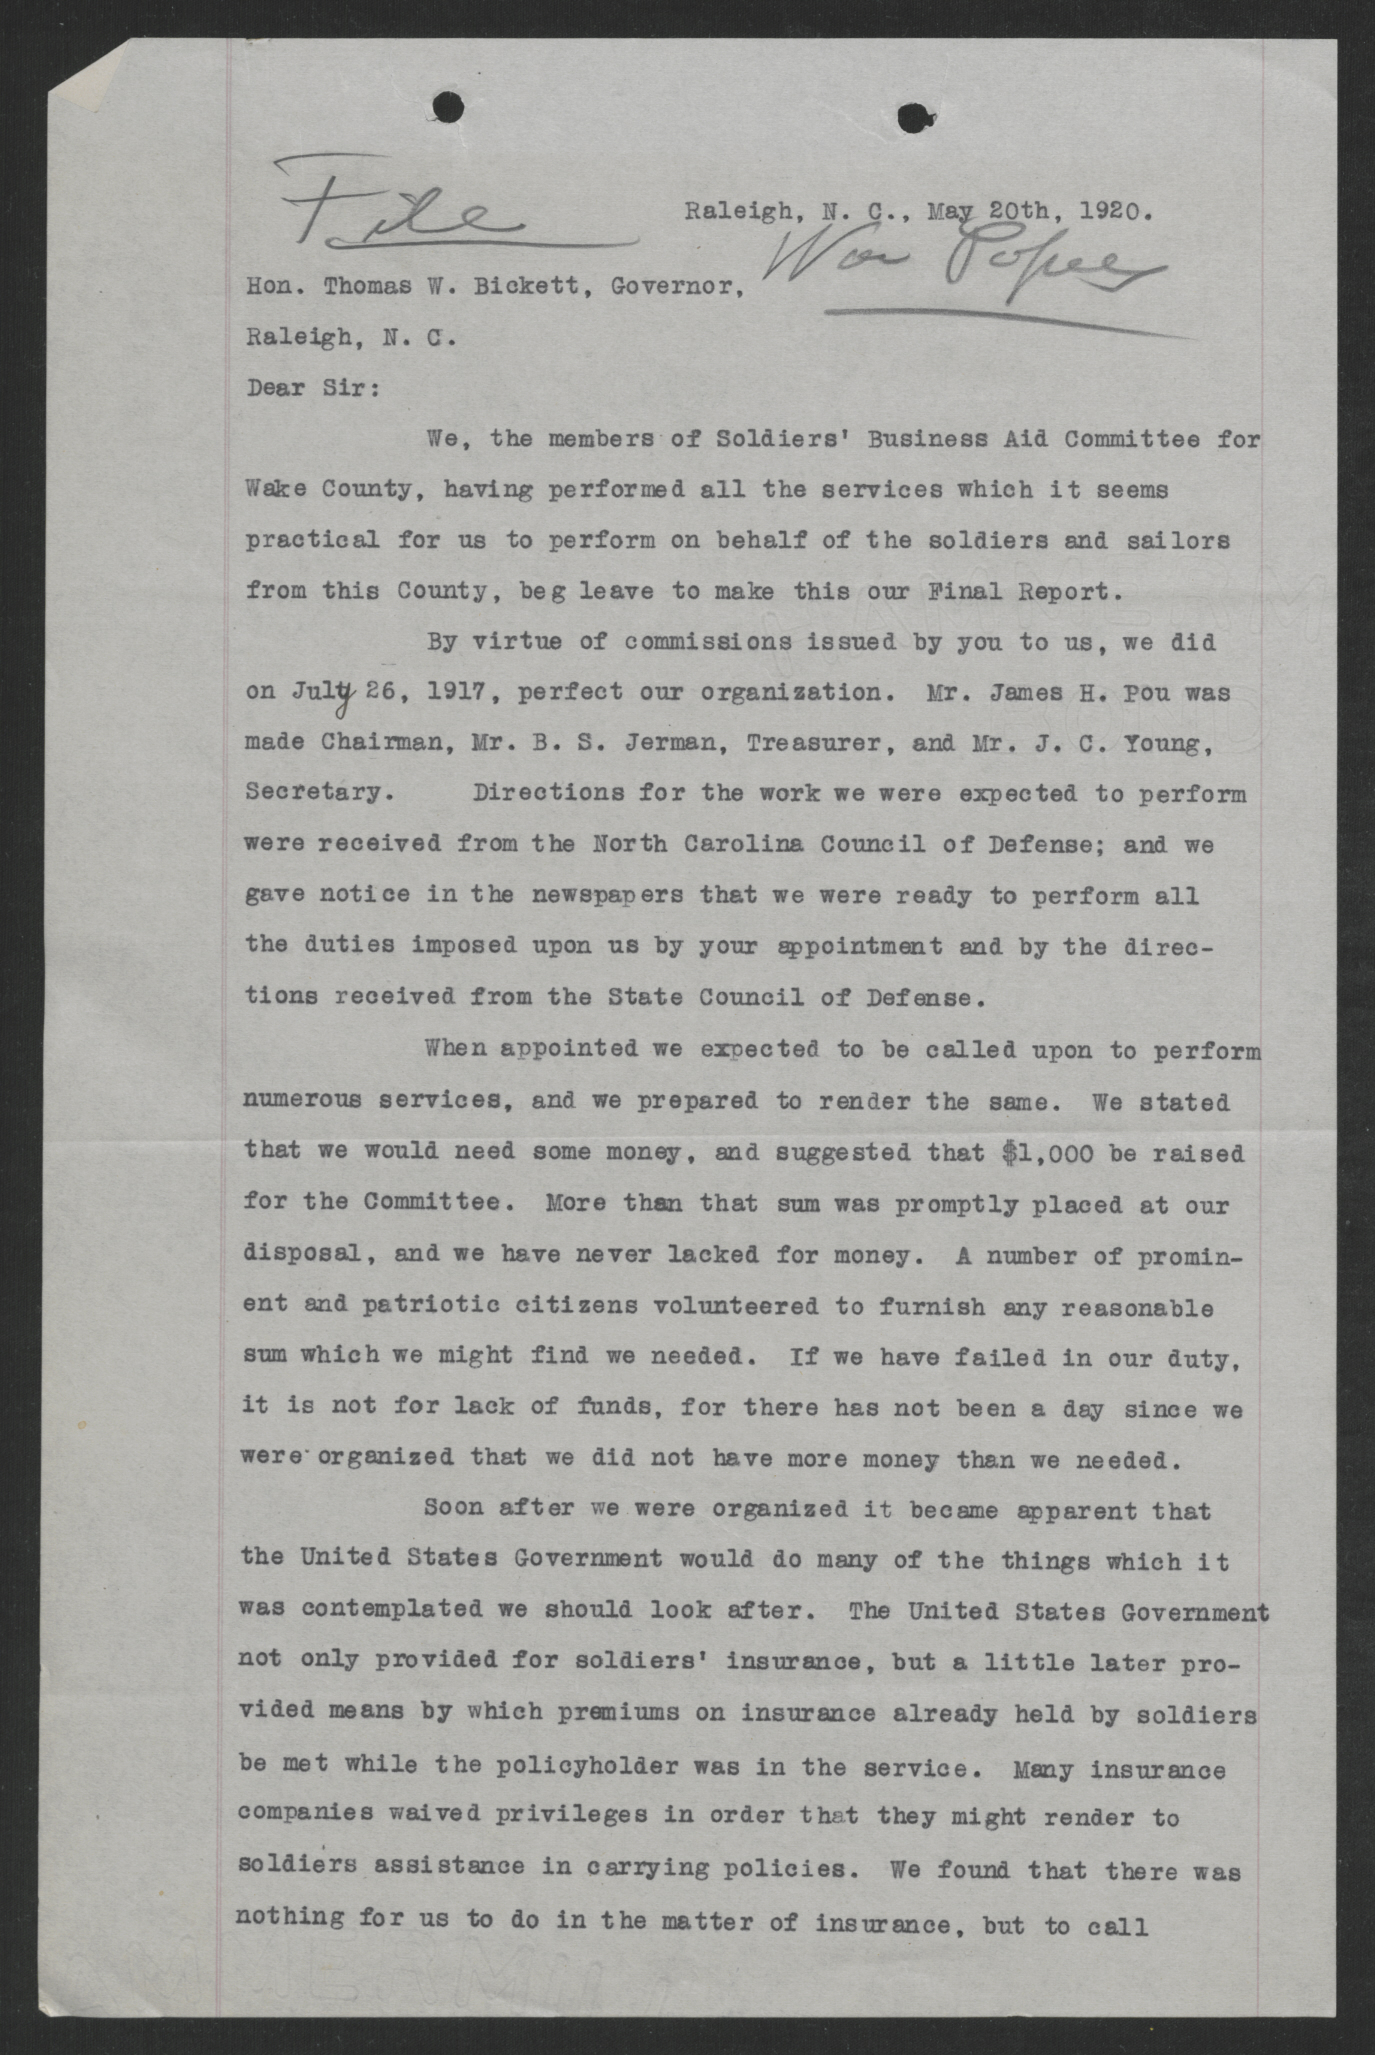 Letter from the Soldiers' Business Aid Committee of Wake County to Thomas W. Bickett, May 20, 1920, page 1